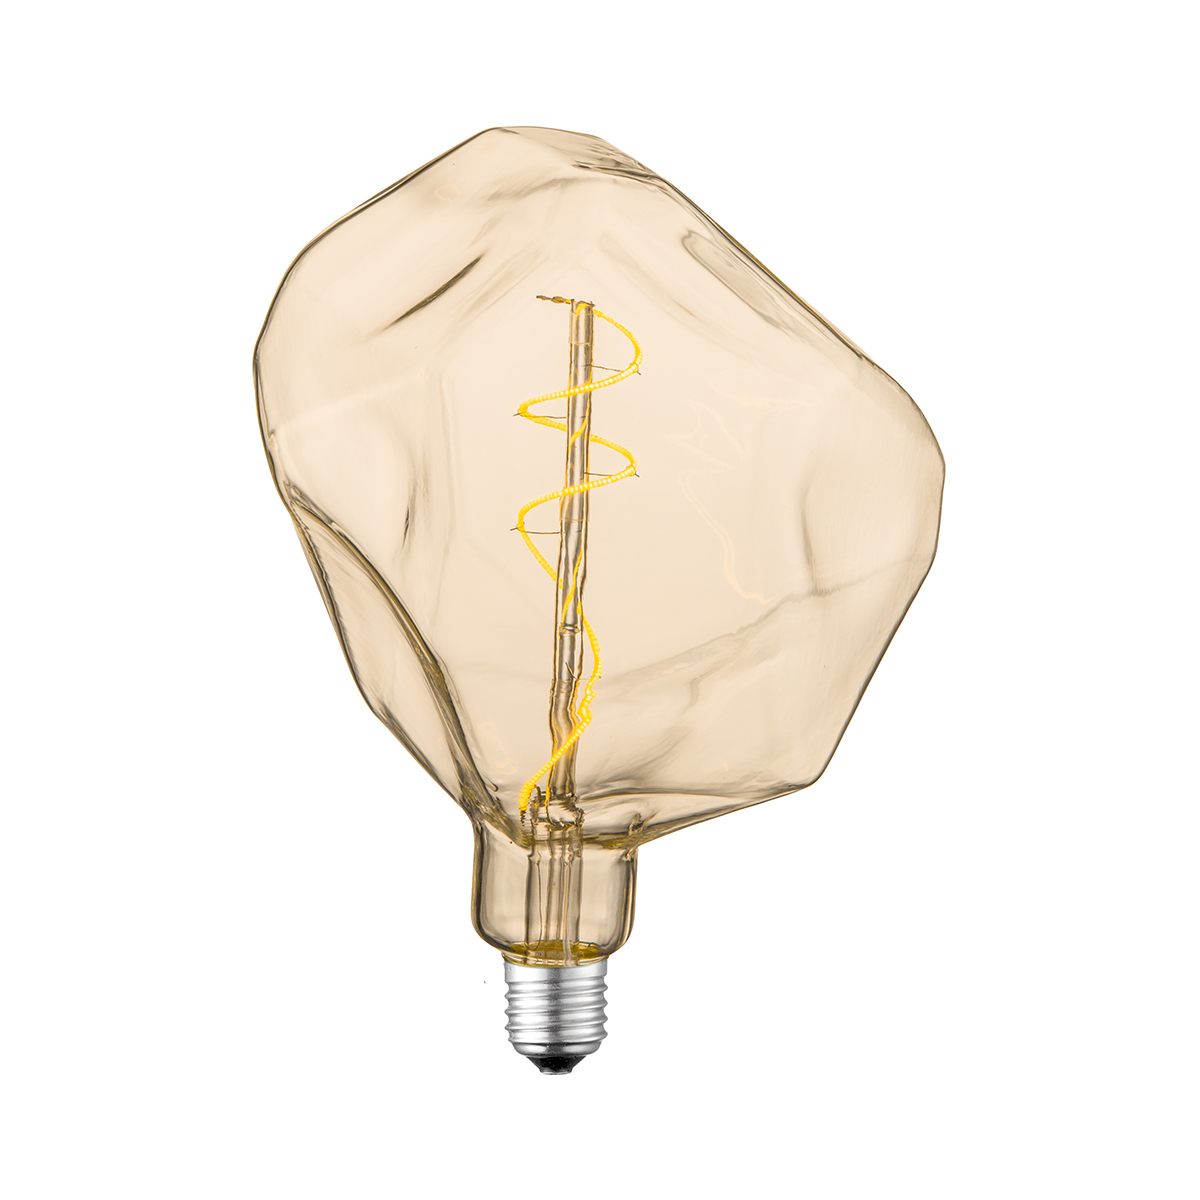 Tangla lighting - TLB-8104-04AM - LED Light Bulb Single Spiral filament - special 4W amber - virtual - dimmable - E27